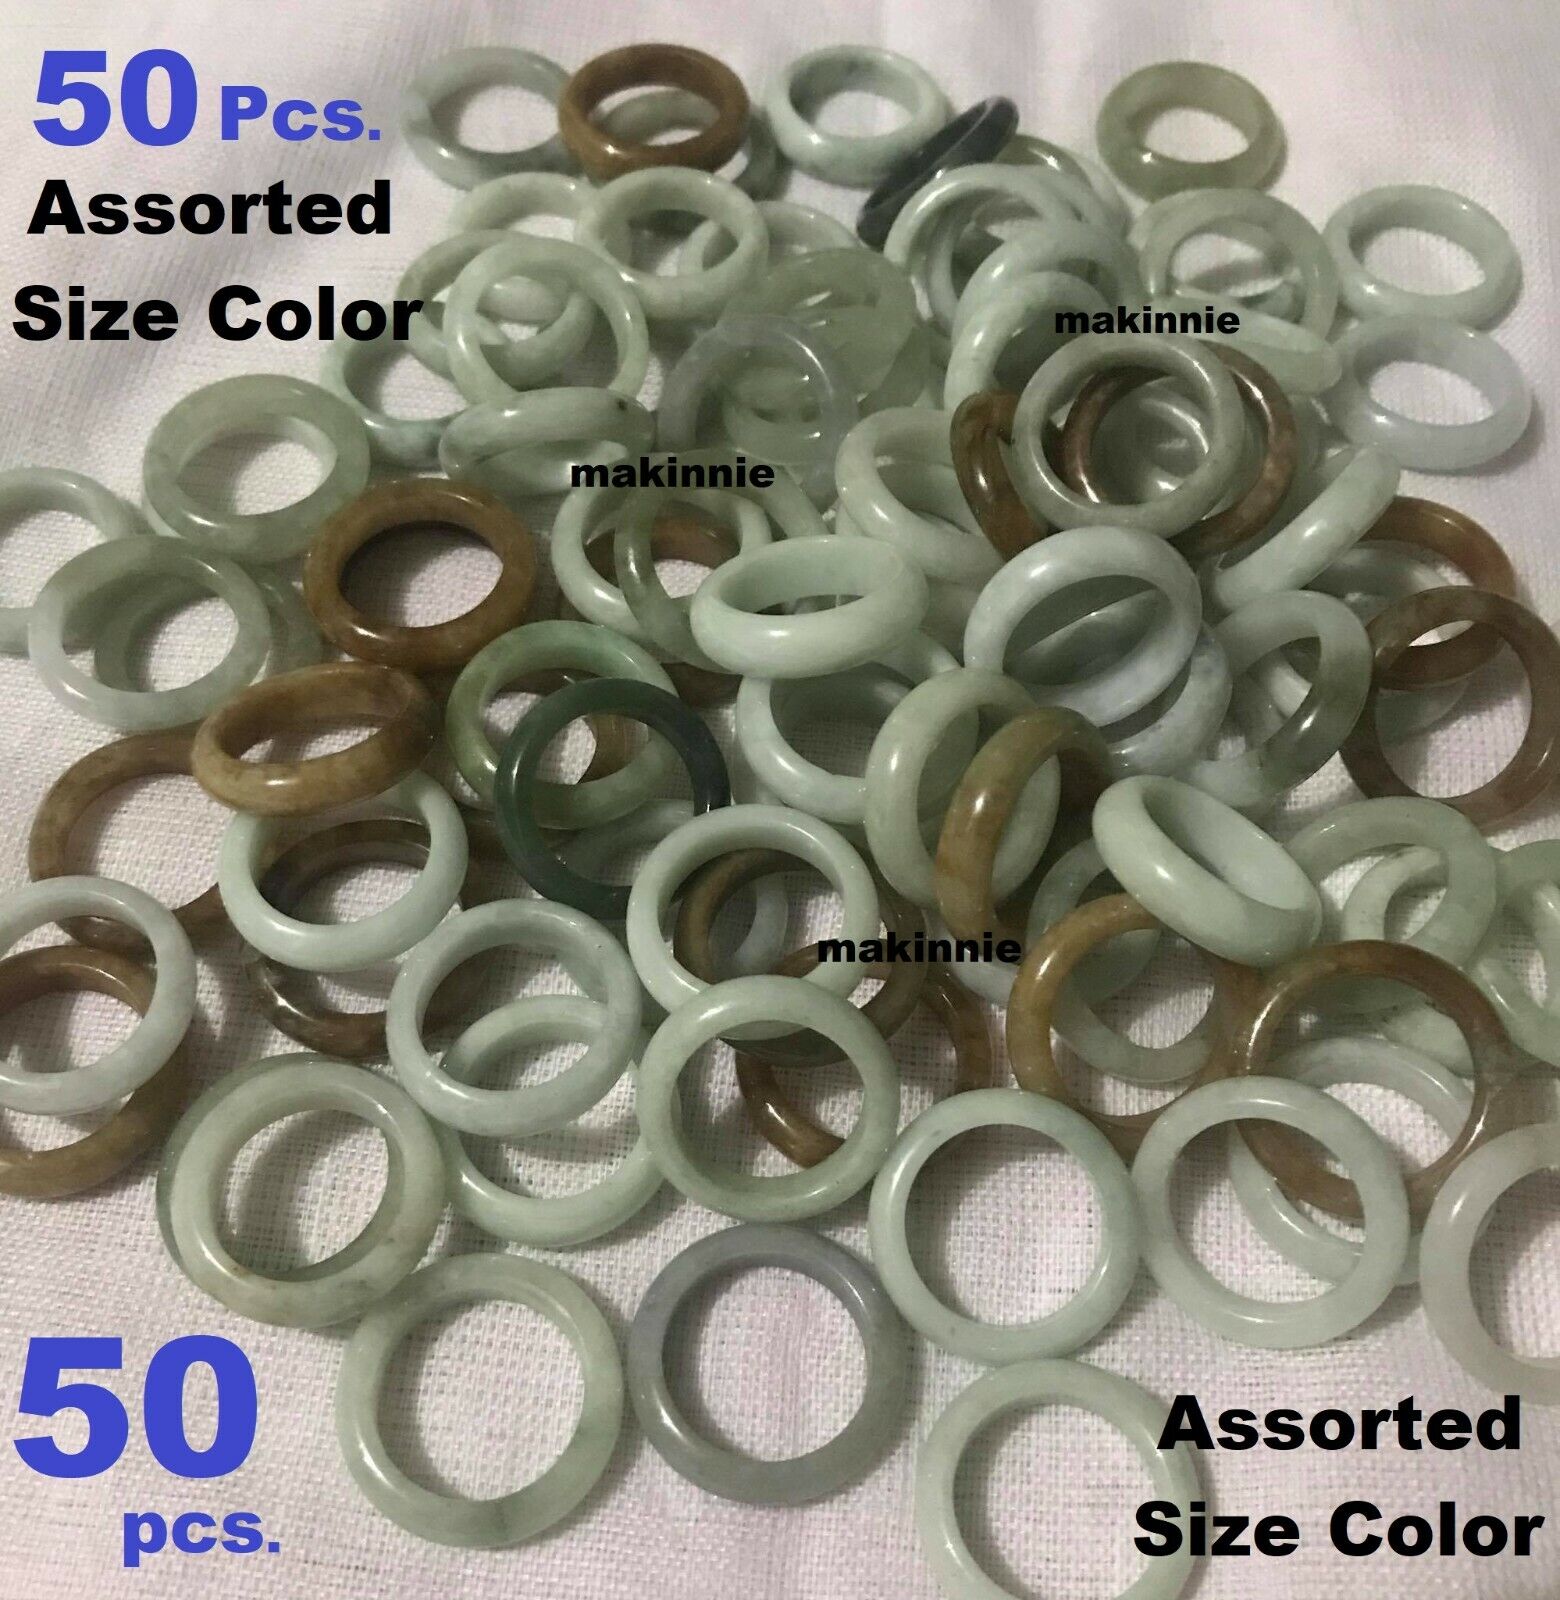 50 Pcs Burmese Jadeite Ring Bulk Lot Untreated Assorted Size Color Natural Jade makinnie Does Not Apply